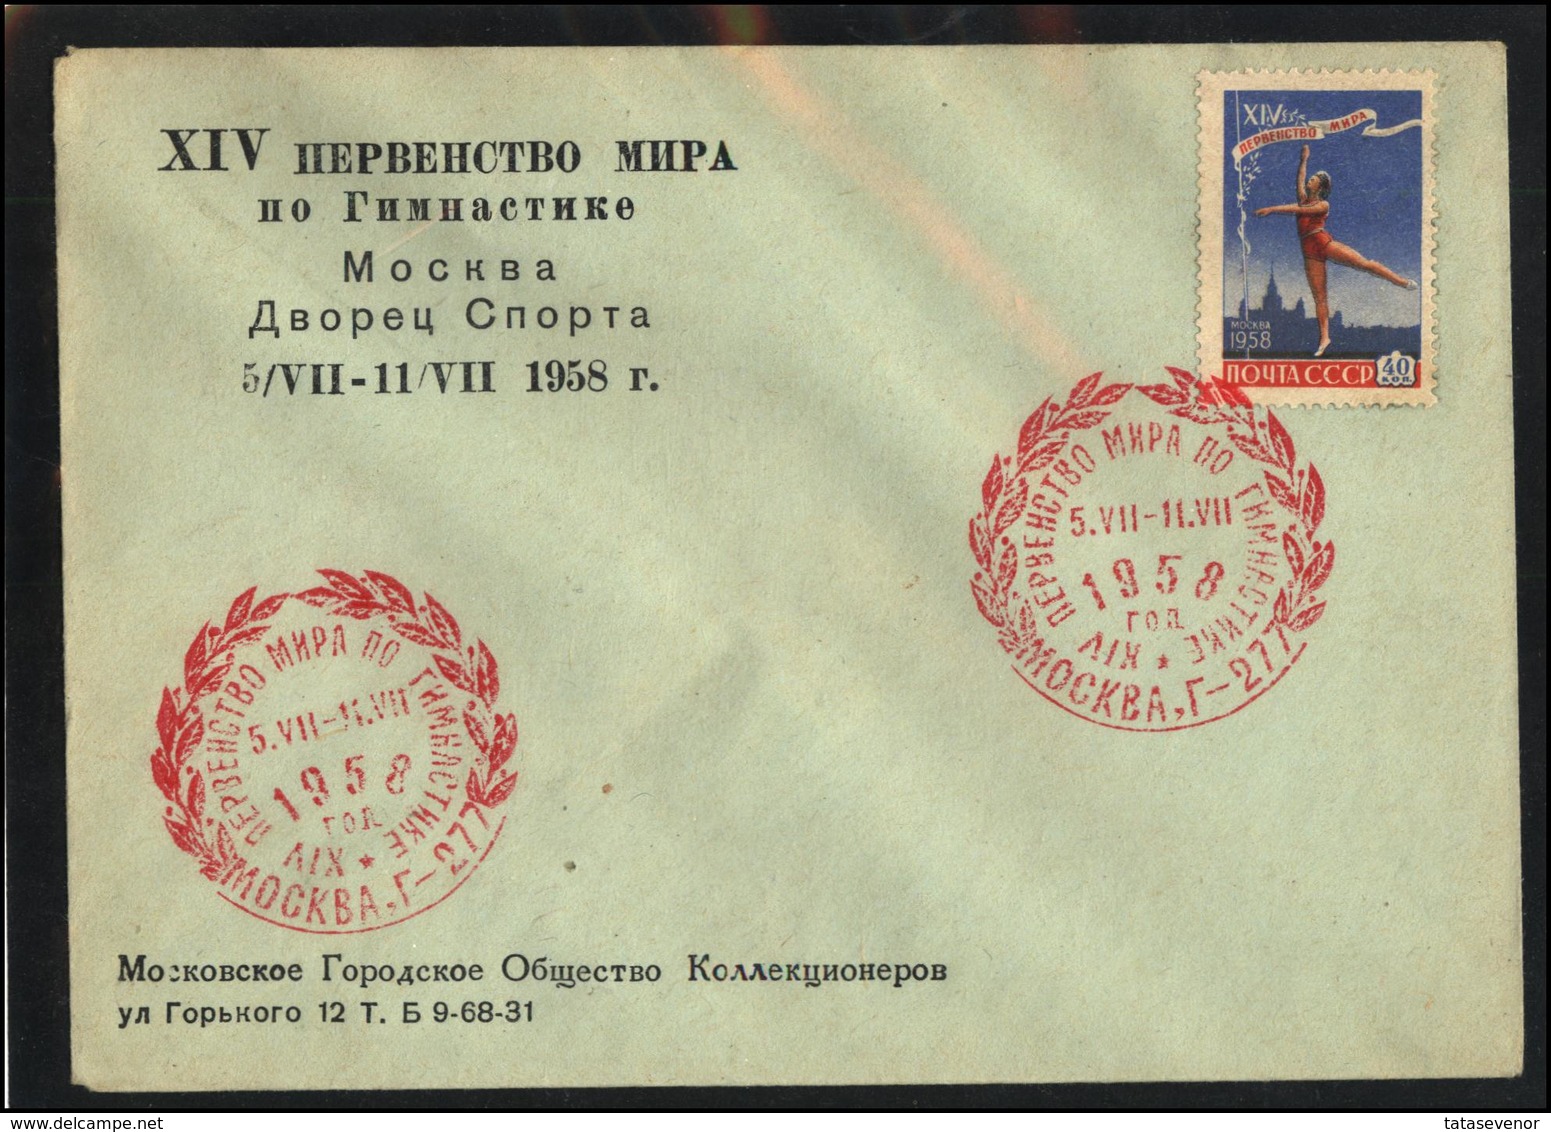 RUSSIA USSR Private CancellationUSSR Se SPEC NNN 1958Msk Gymnastic World Championship 1958 - Locales & Privados